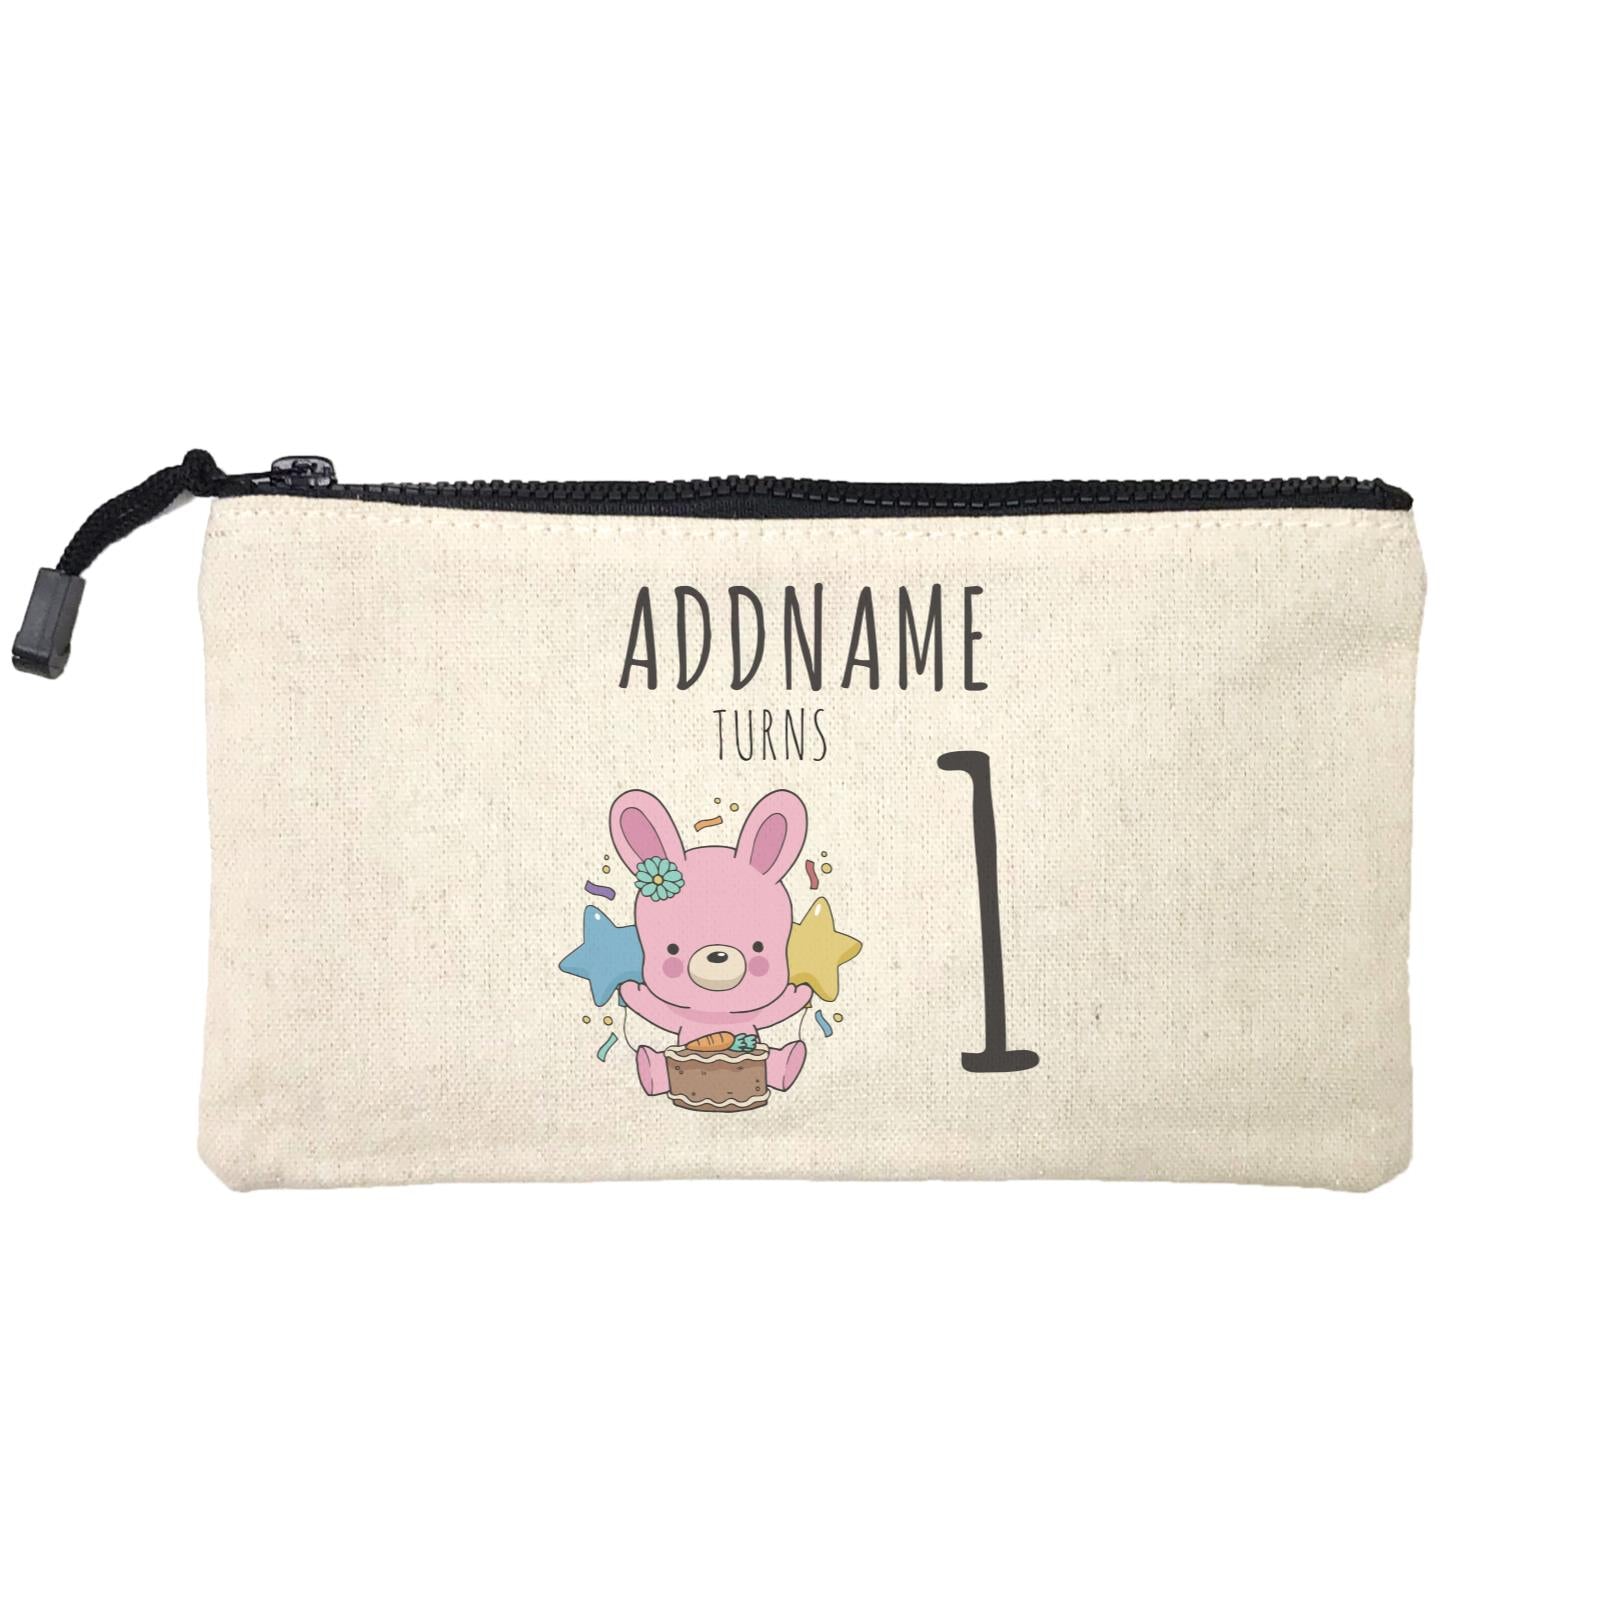 Birthday Sketch Animals Rabbit With Carrot Cake Addname Turns 1 Mini Accessories Stationery Pouch